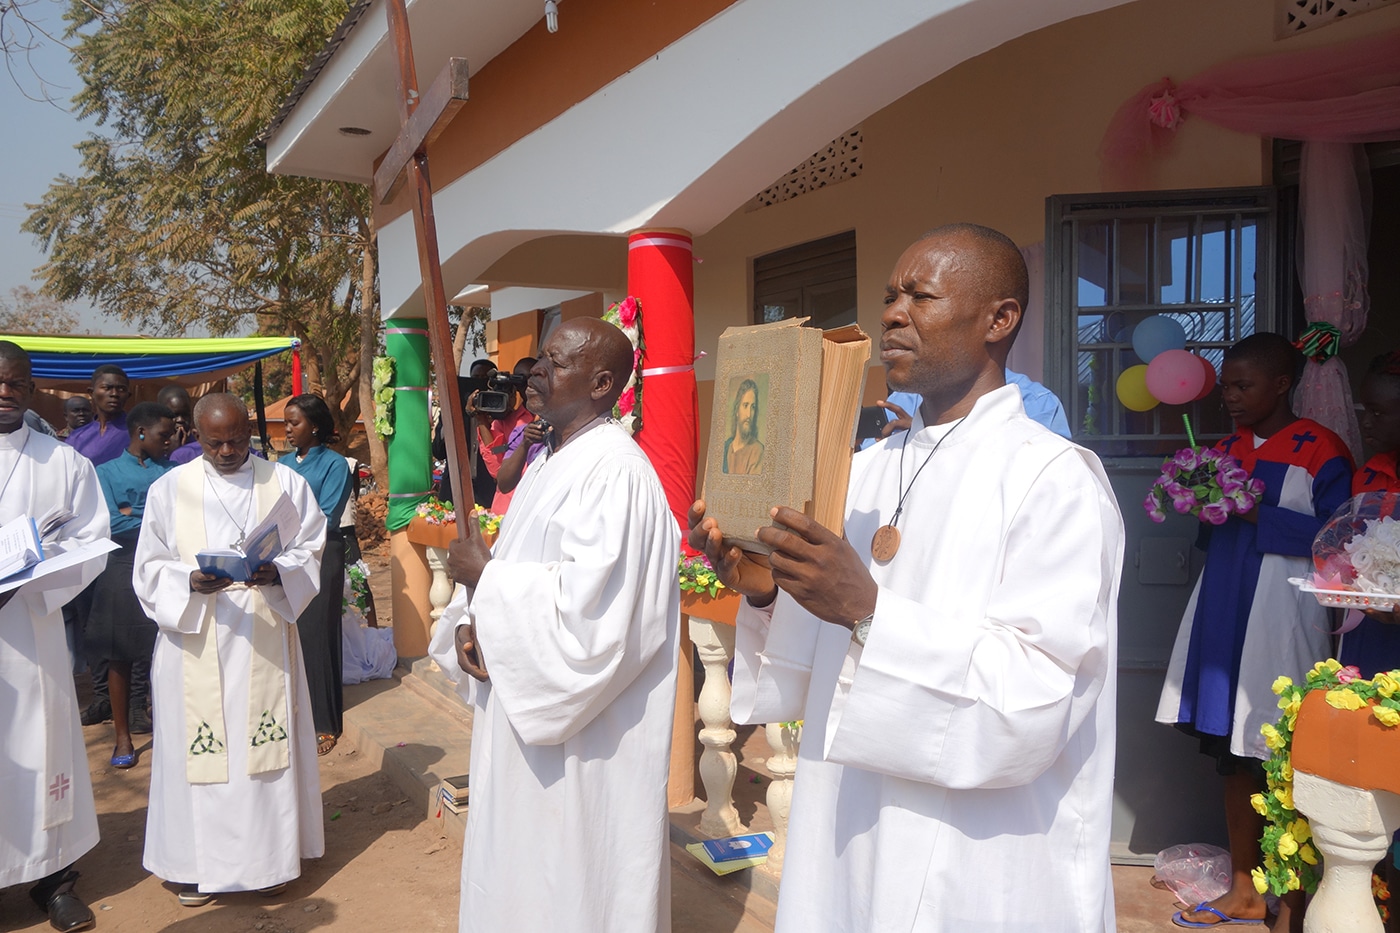 A procession of pastors holding the cross and a Bible